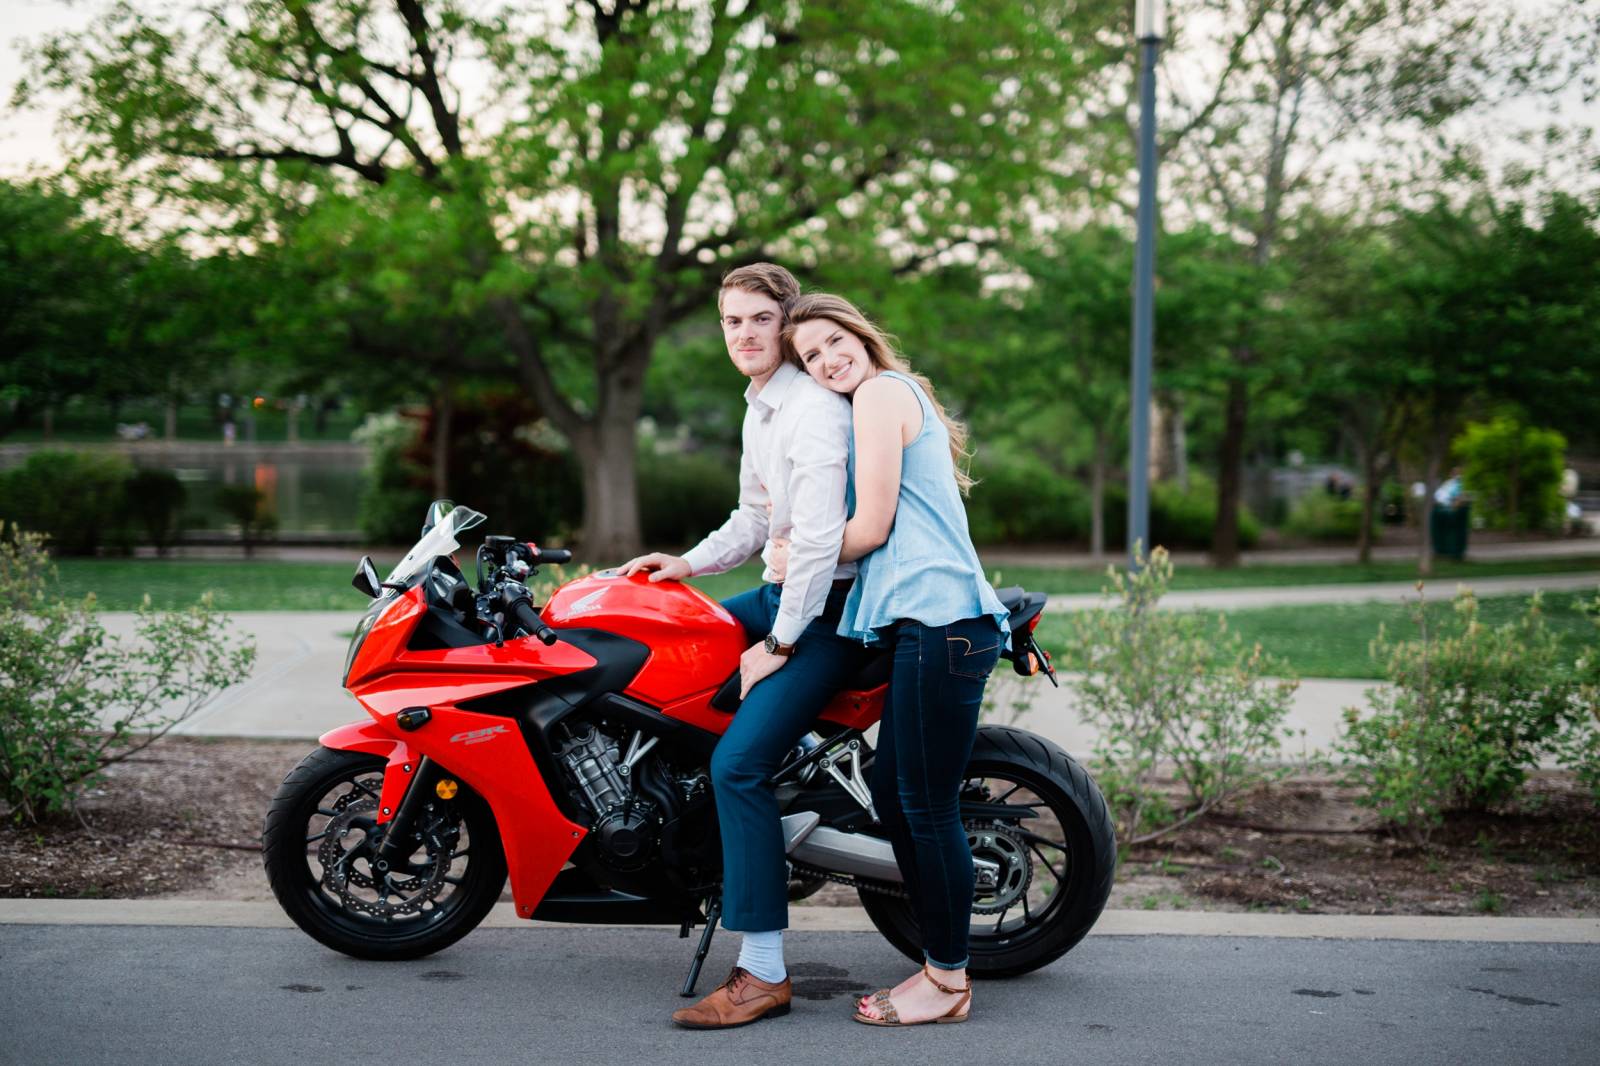 Centennial Park Engagement Session at Sunset with a Red Motorcycle |  Nashville, TN